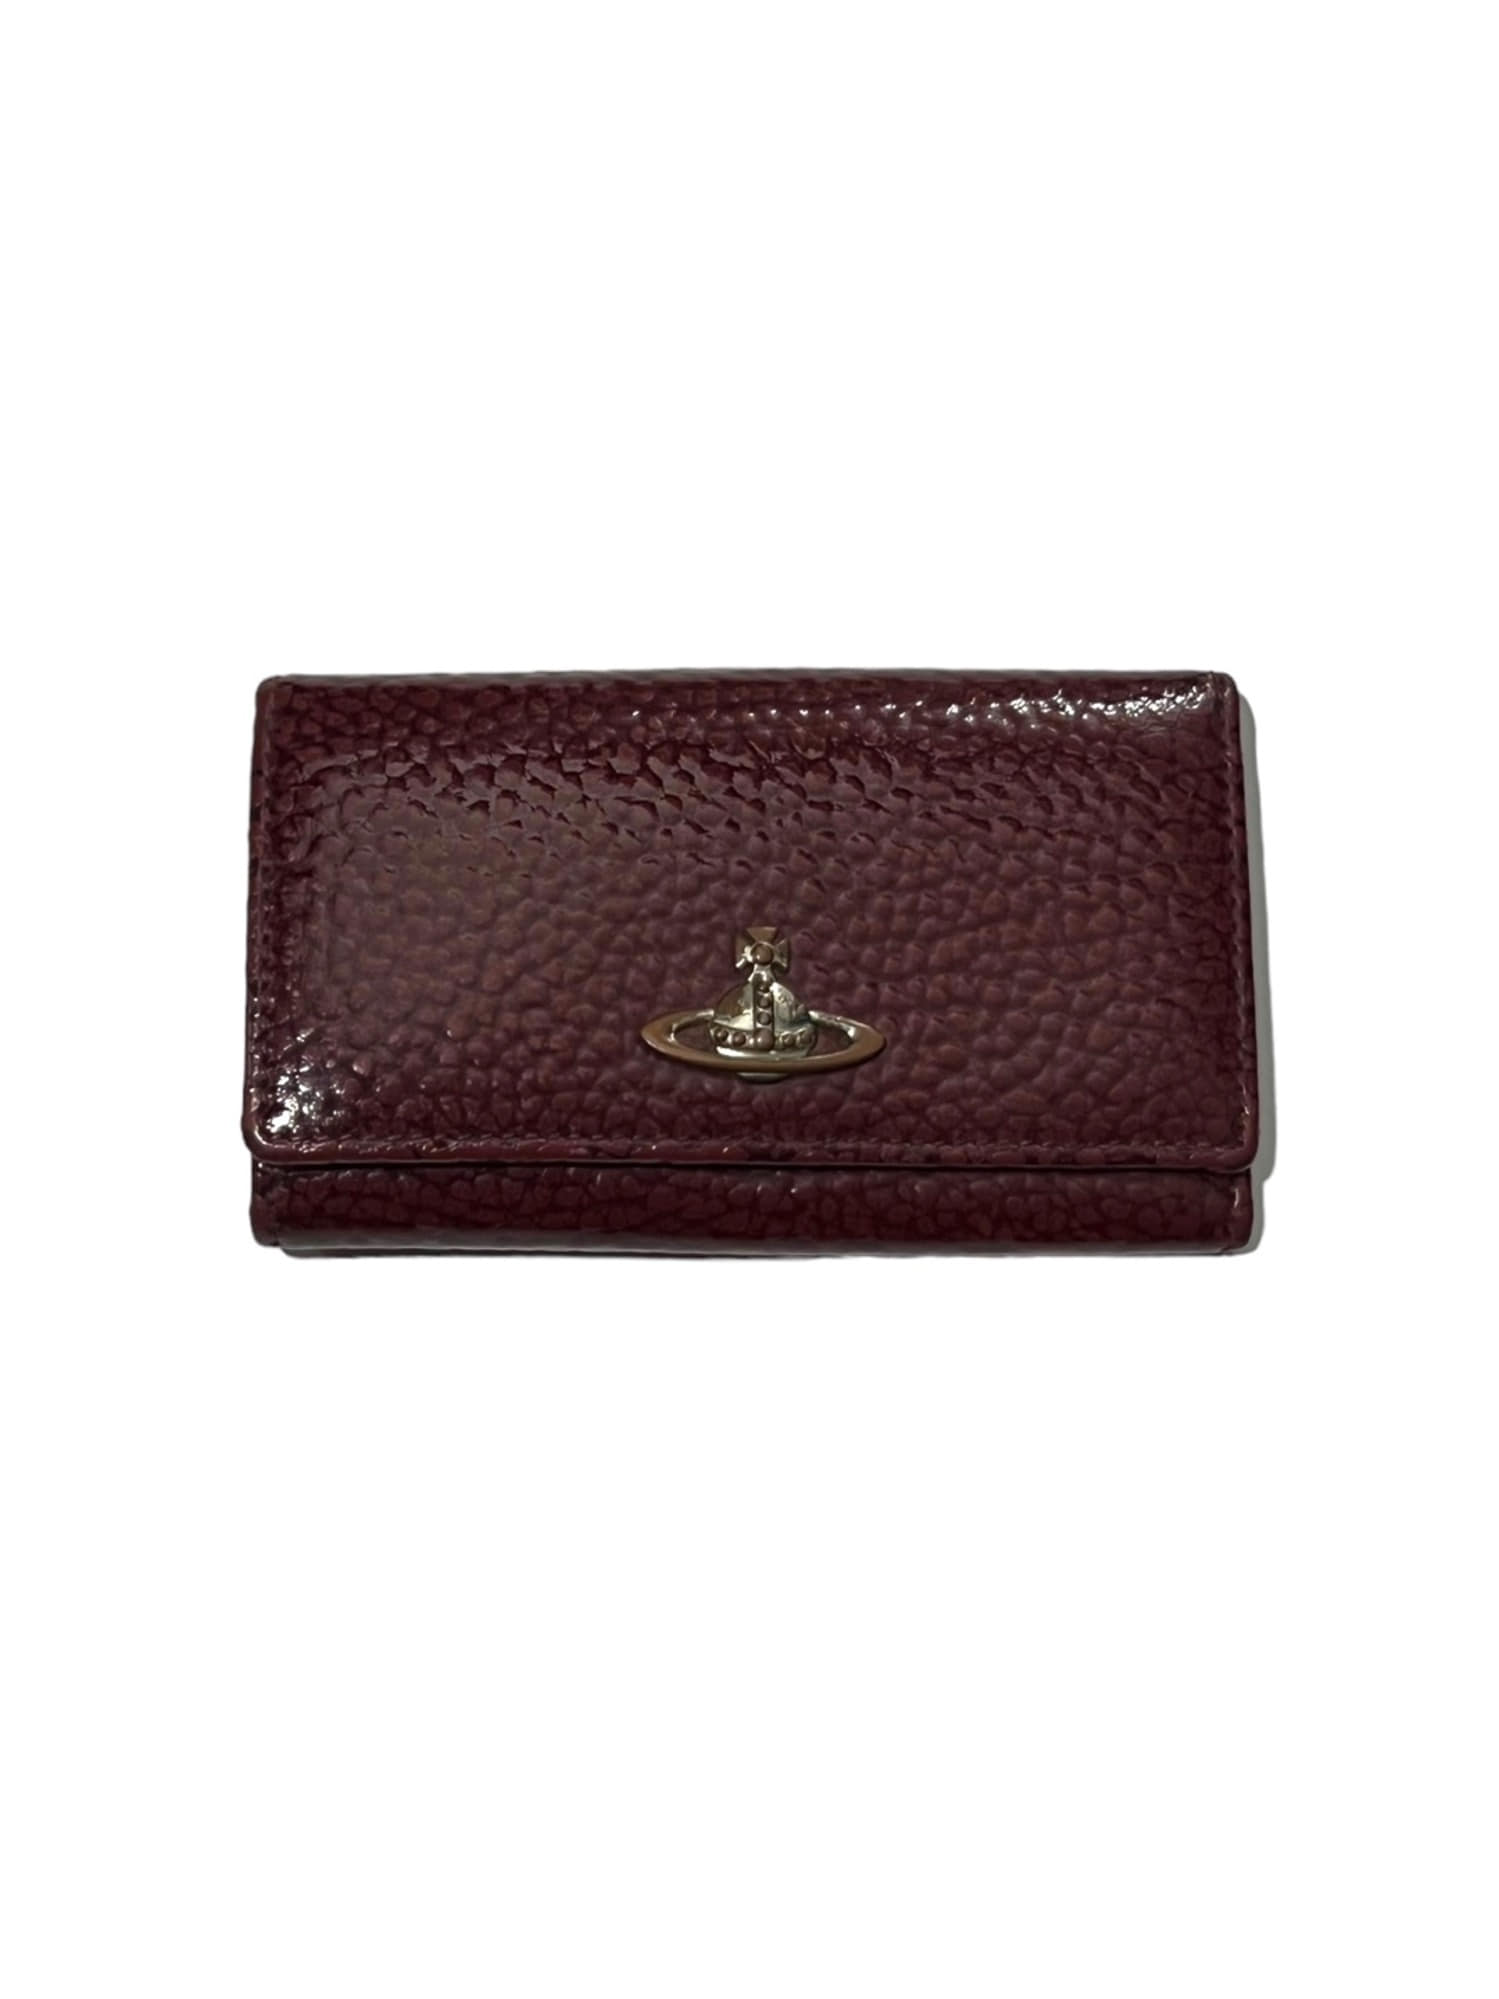 Vivienne Wsetwood Brown Leather Key Case Wallet